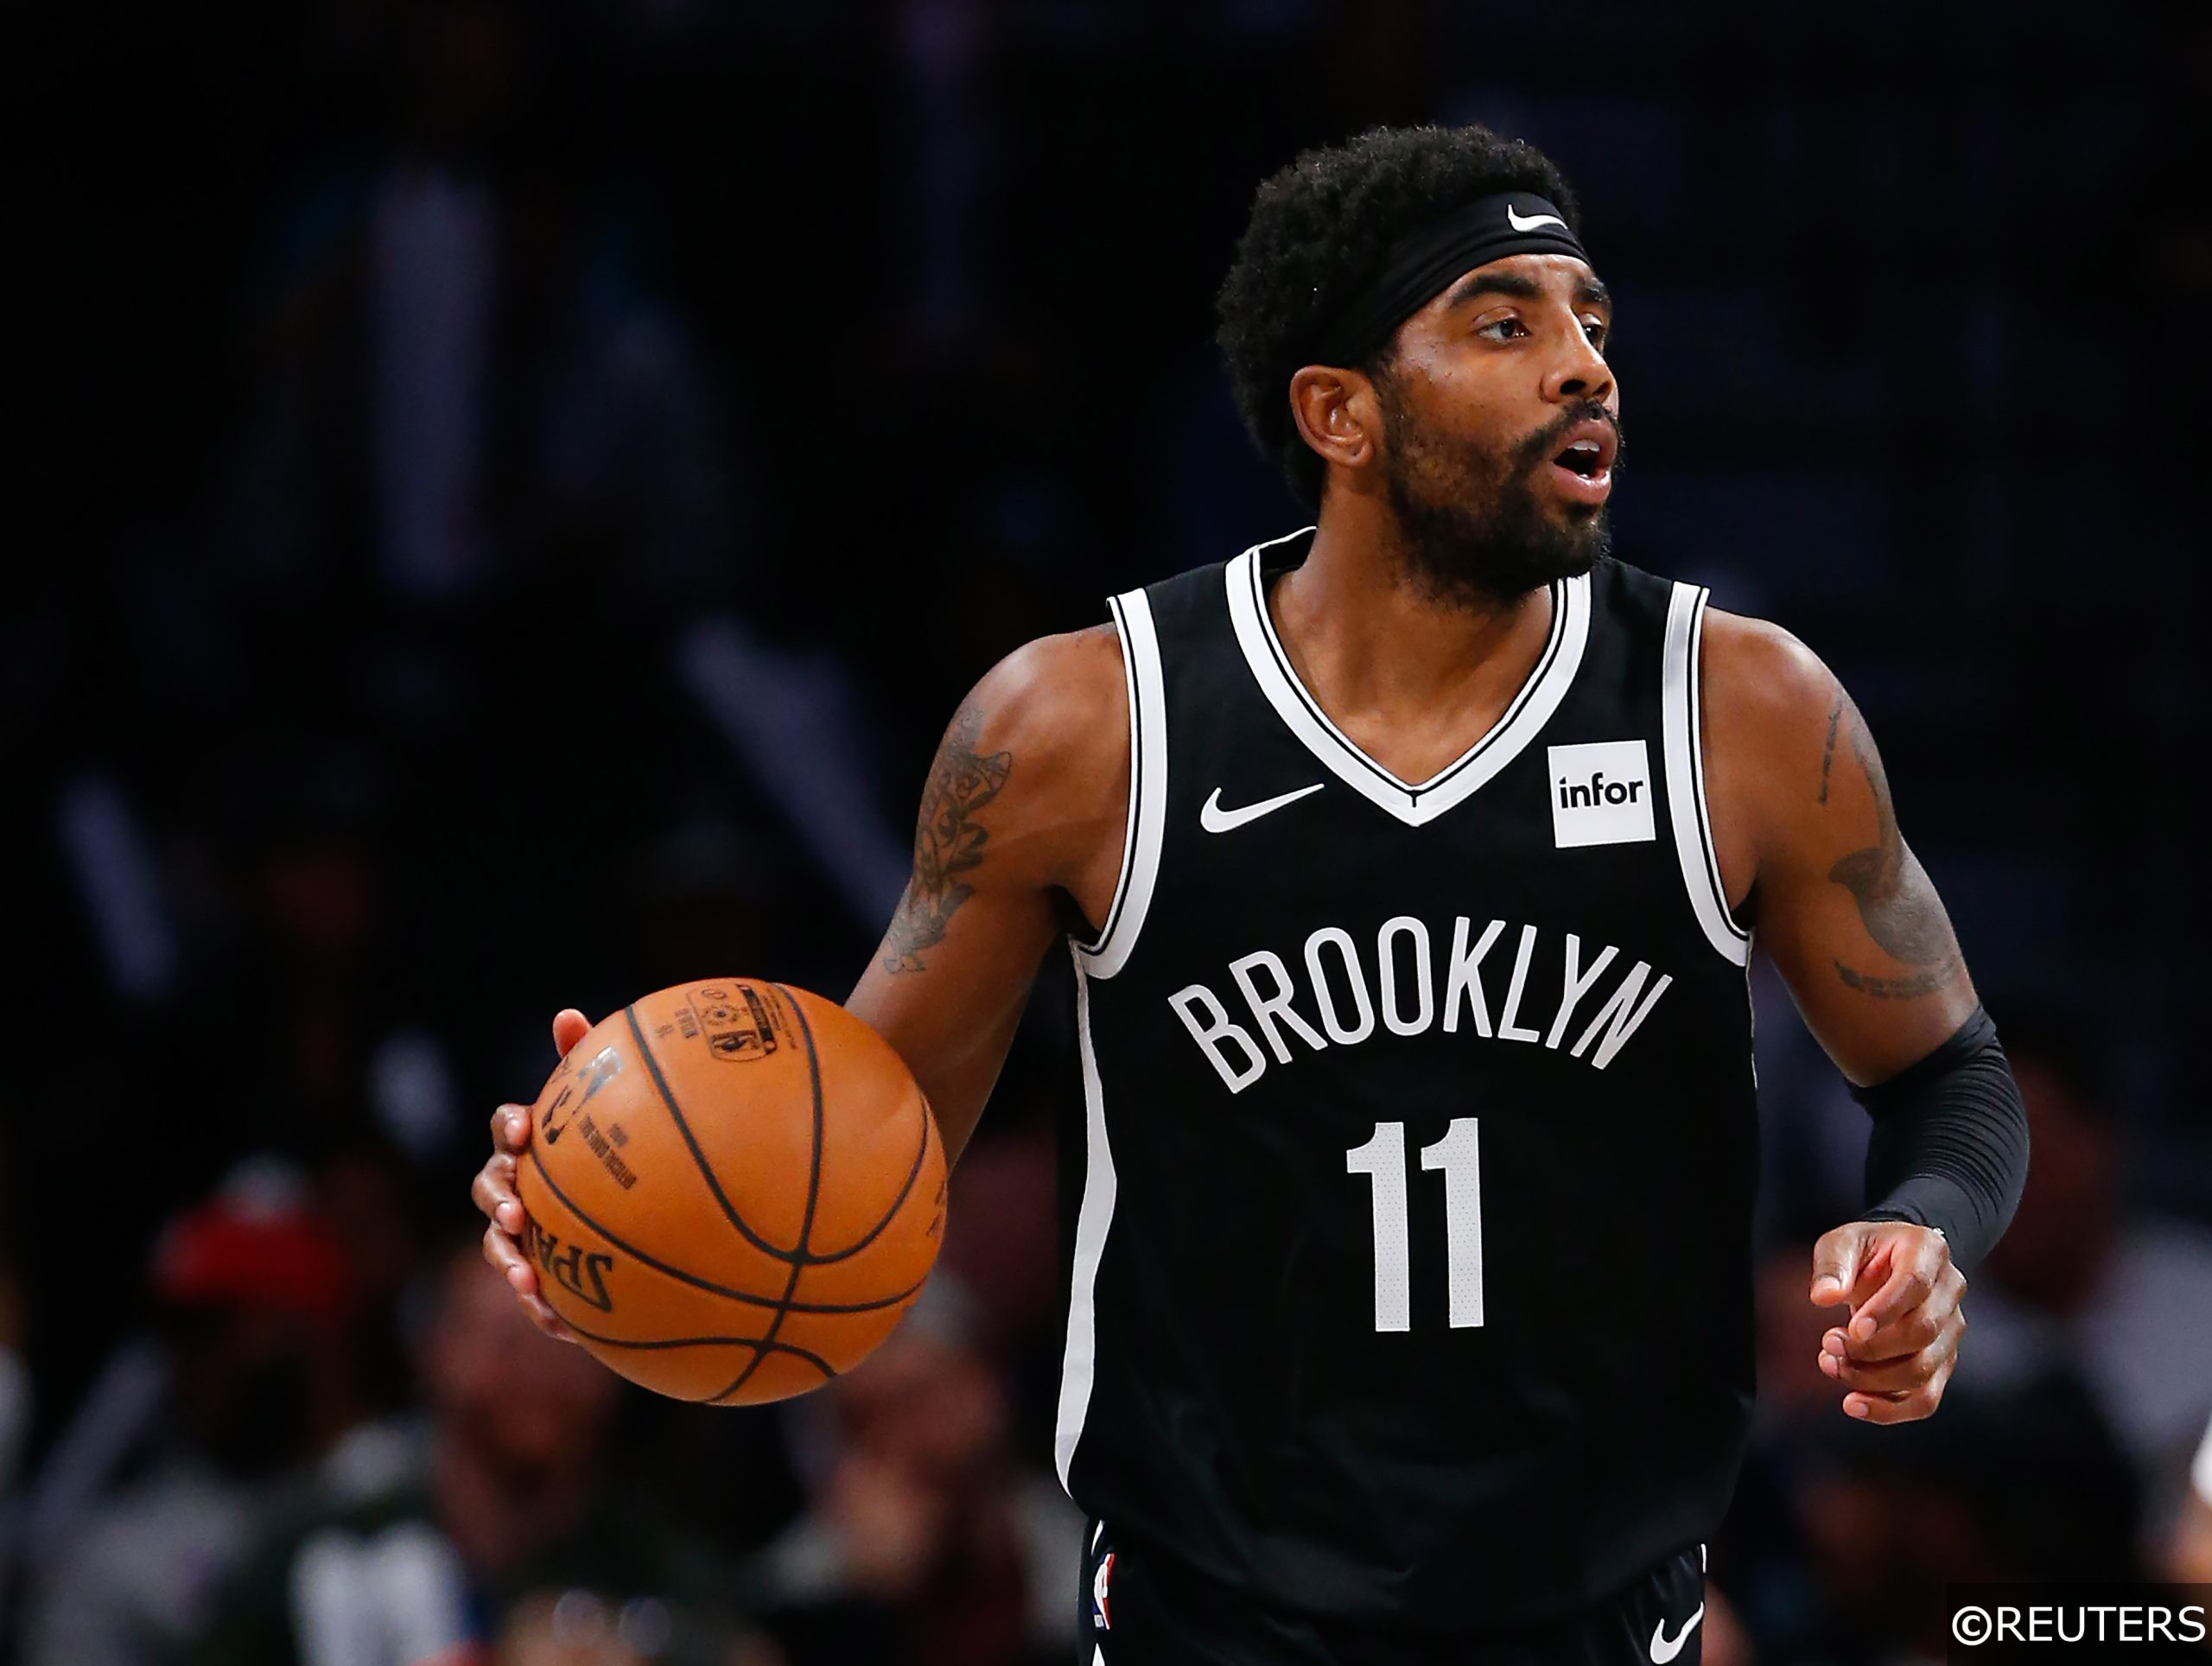 Kyrie Irving Brooklyn Nets vs Indiana Pacers NBA 2020